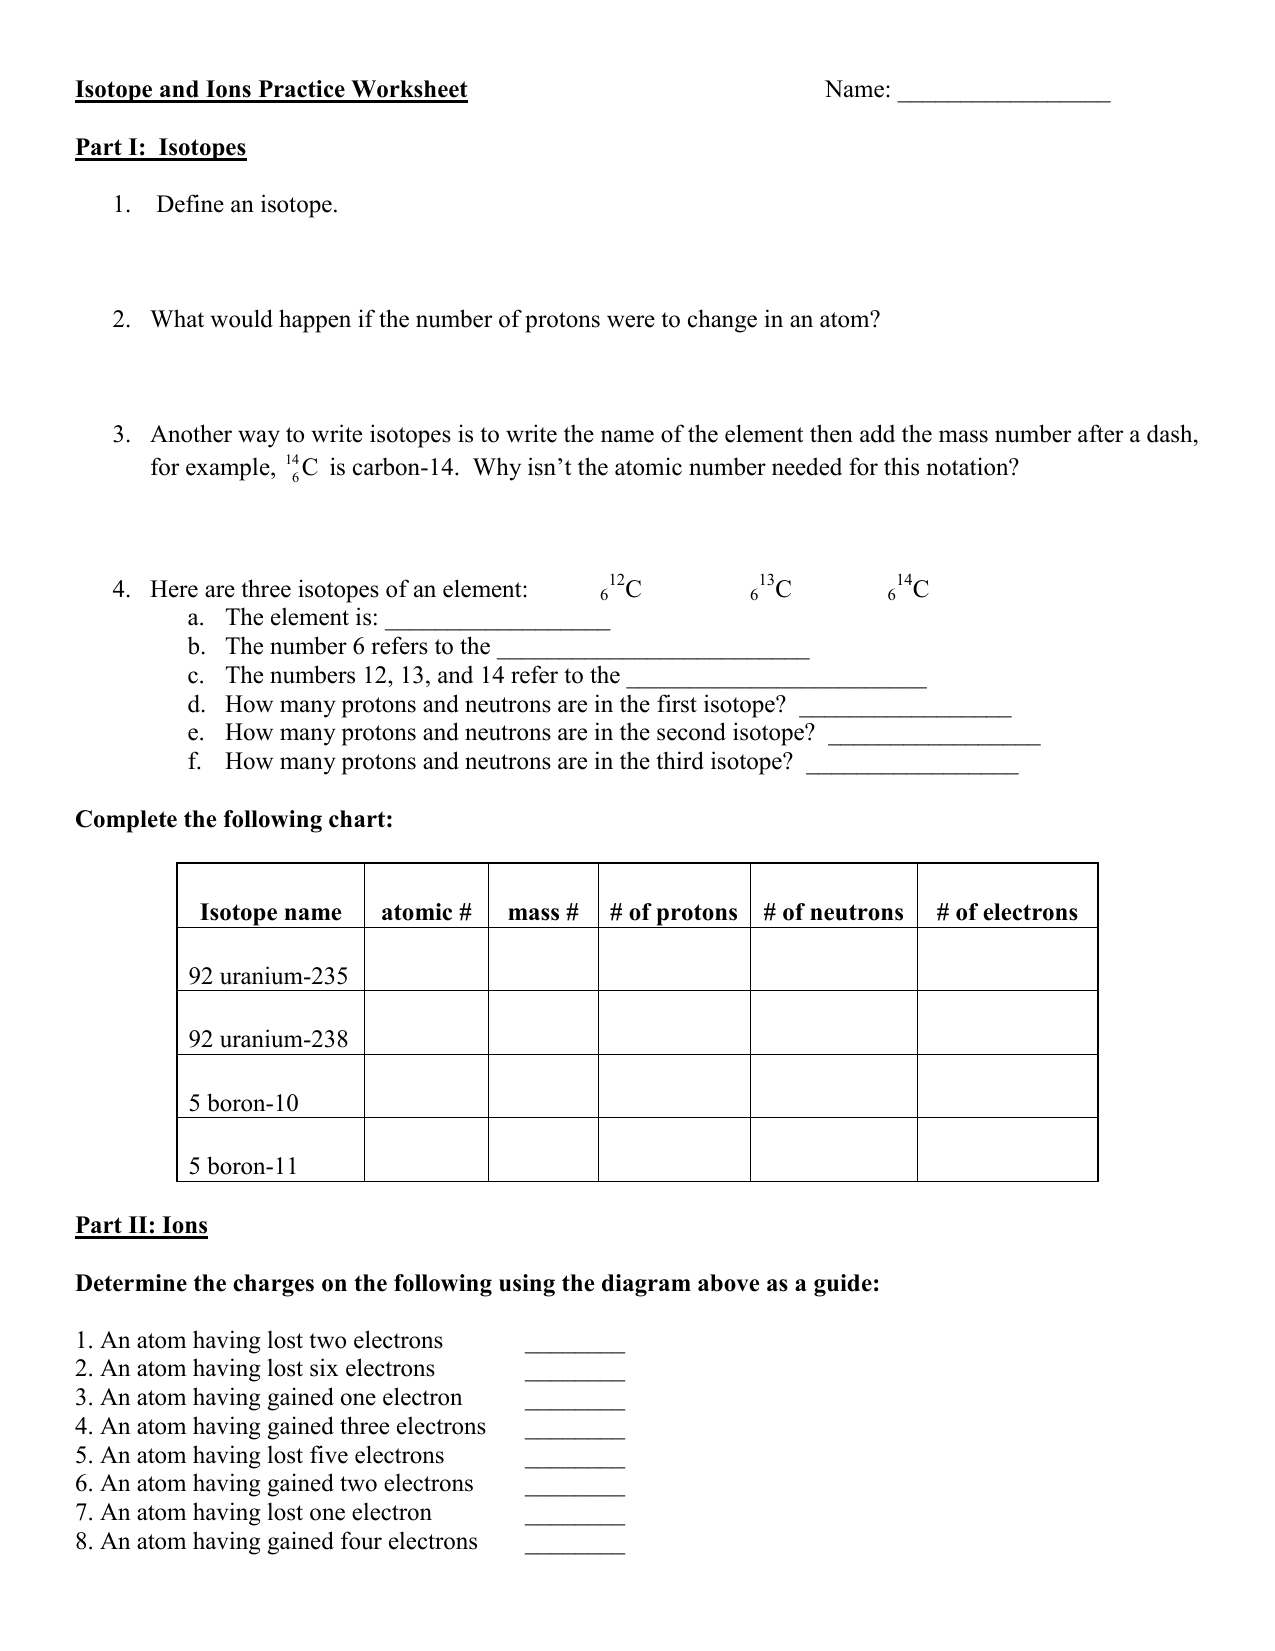 Isotope and Ions Practice Worksheet Name (10) Intended For Isotope Practice Worksheet Answer Key